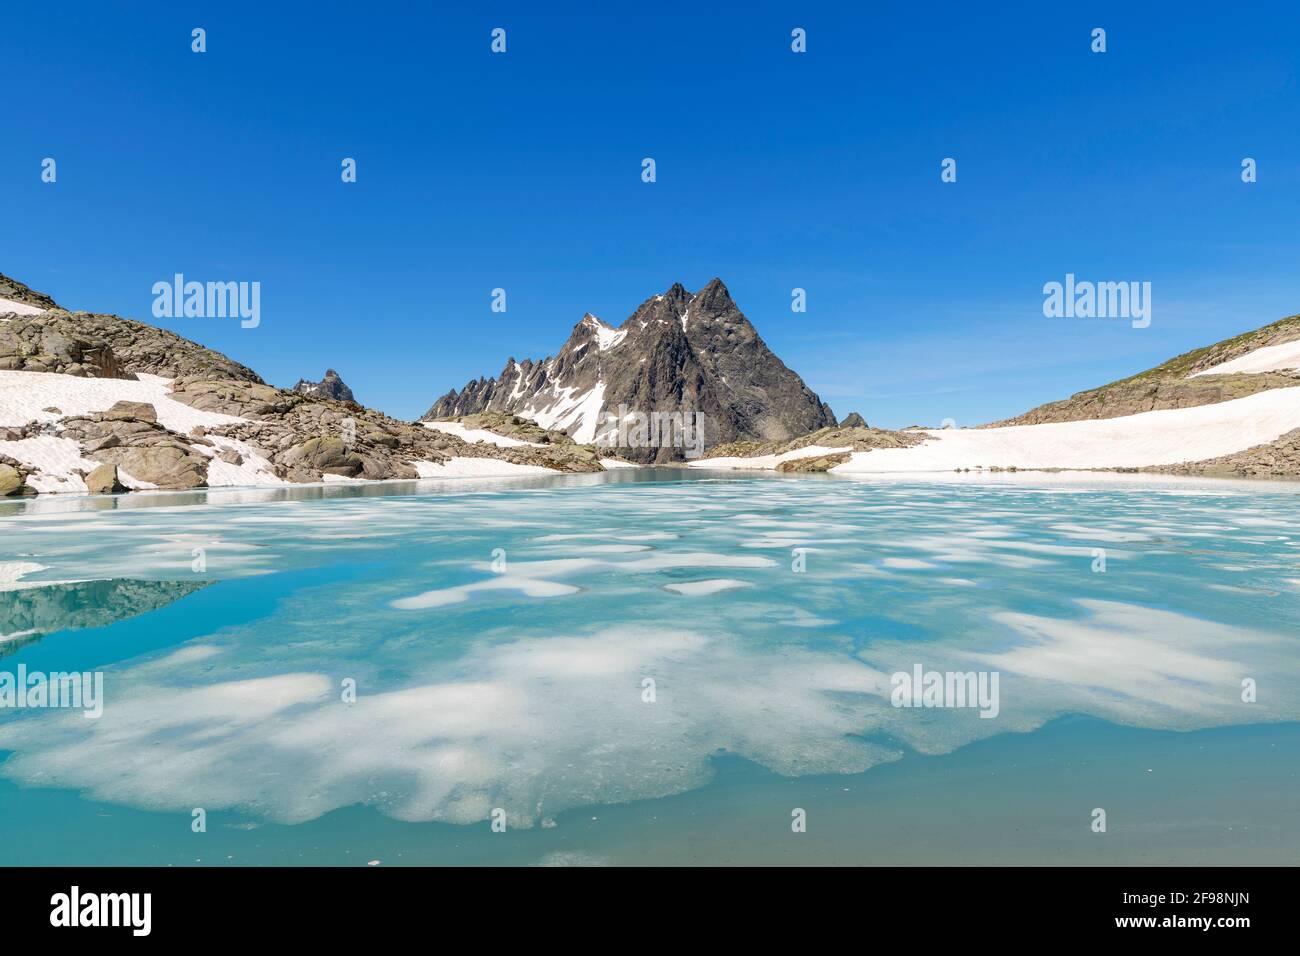 Thawing mountain lake with ice floes in summer under a blue sky near St. Anton am Arlberg. Patteriol in the background. Verwall, Tyrol, Austria Stock Photo